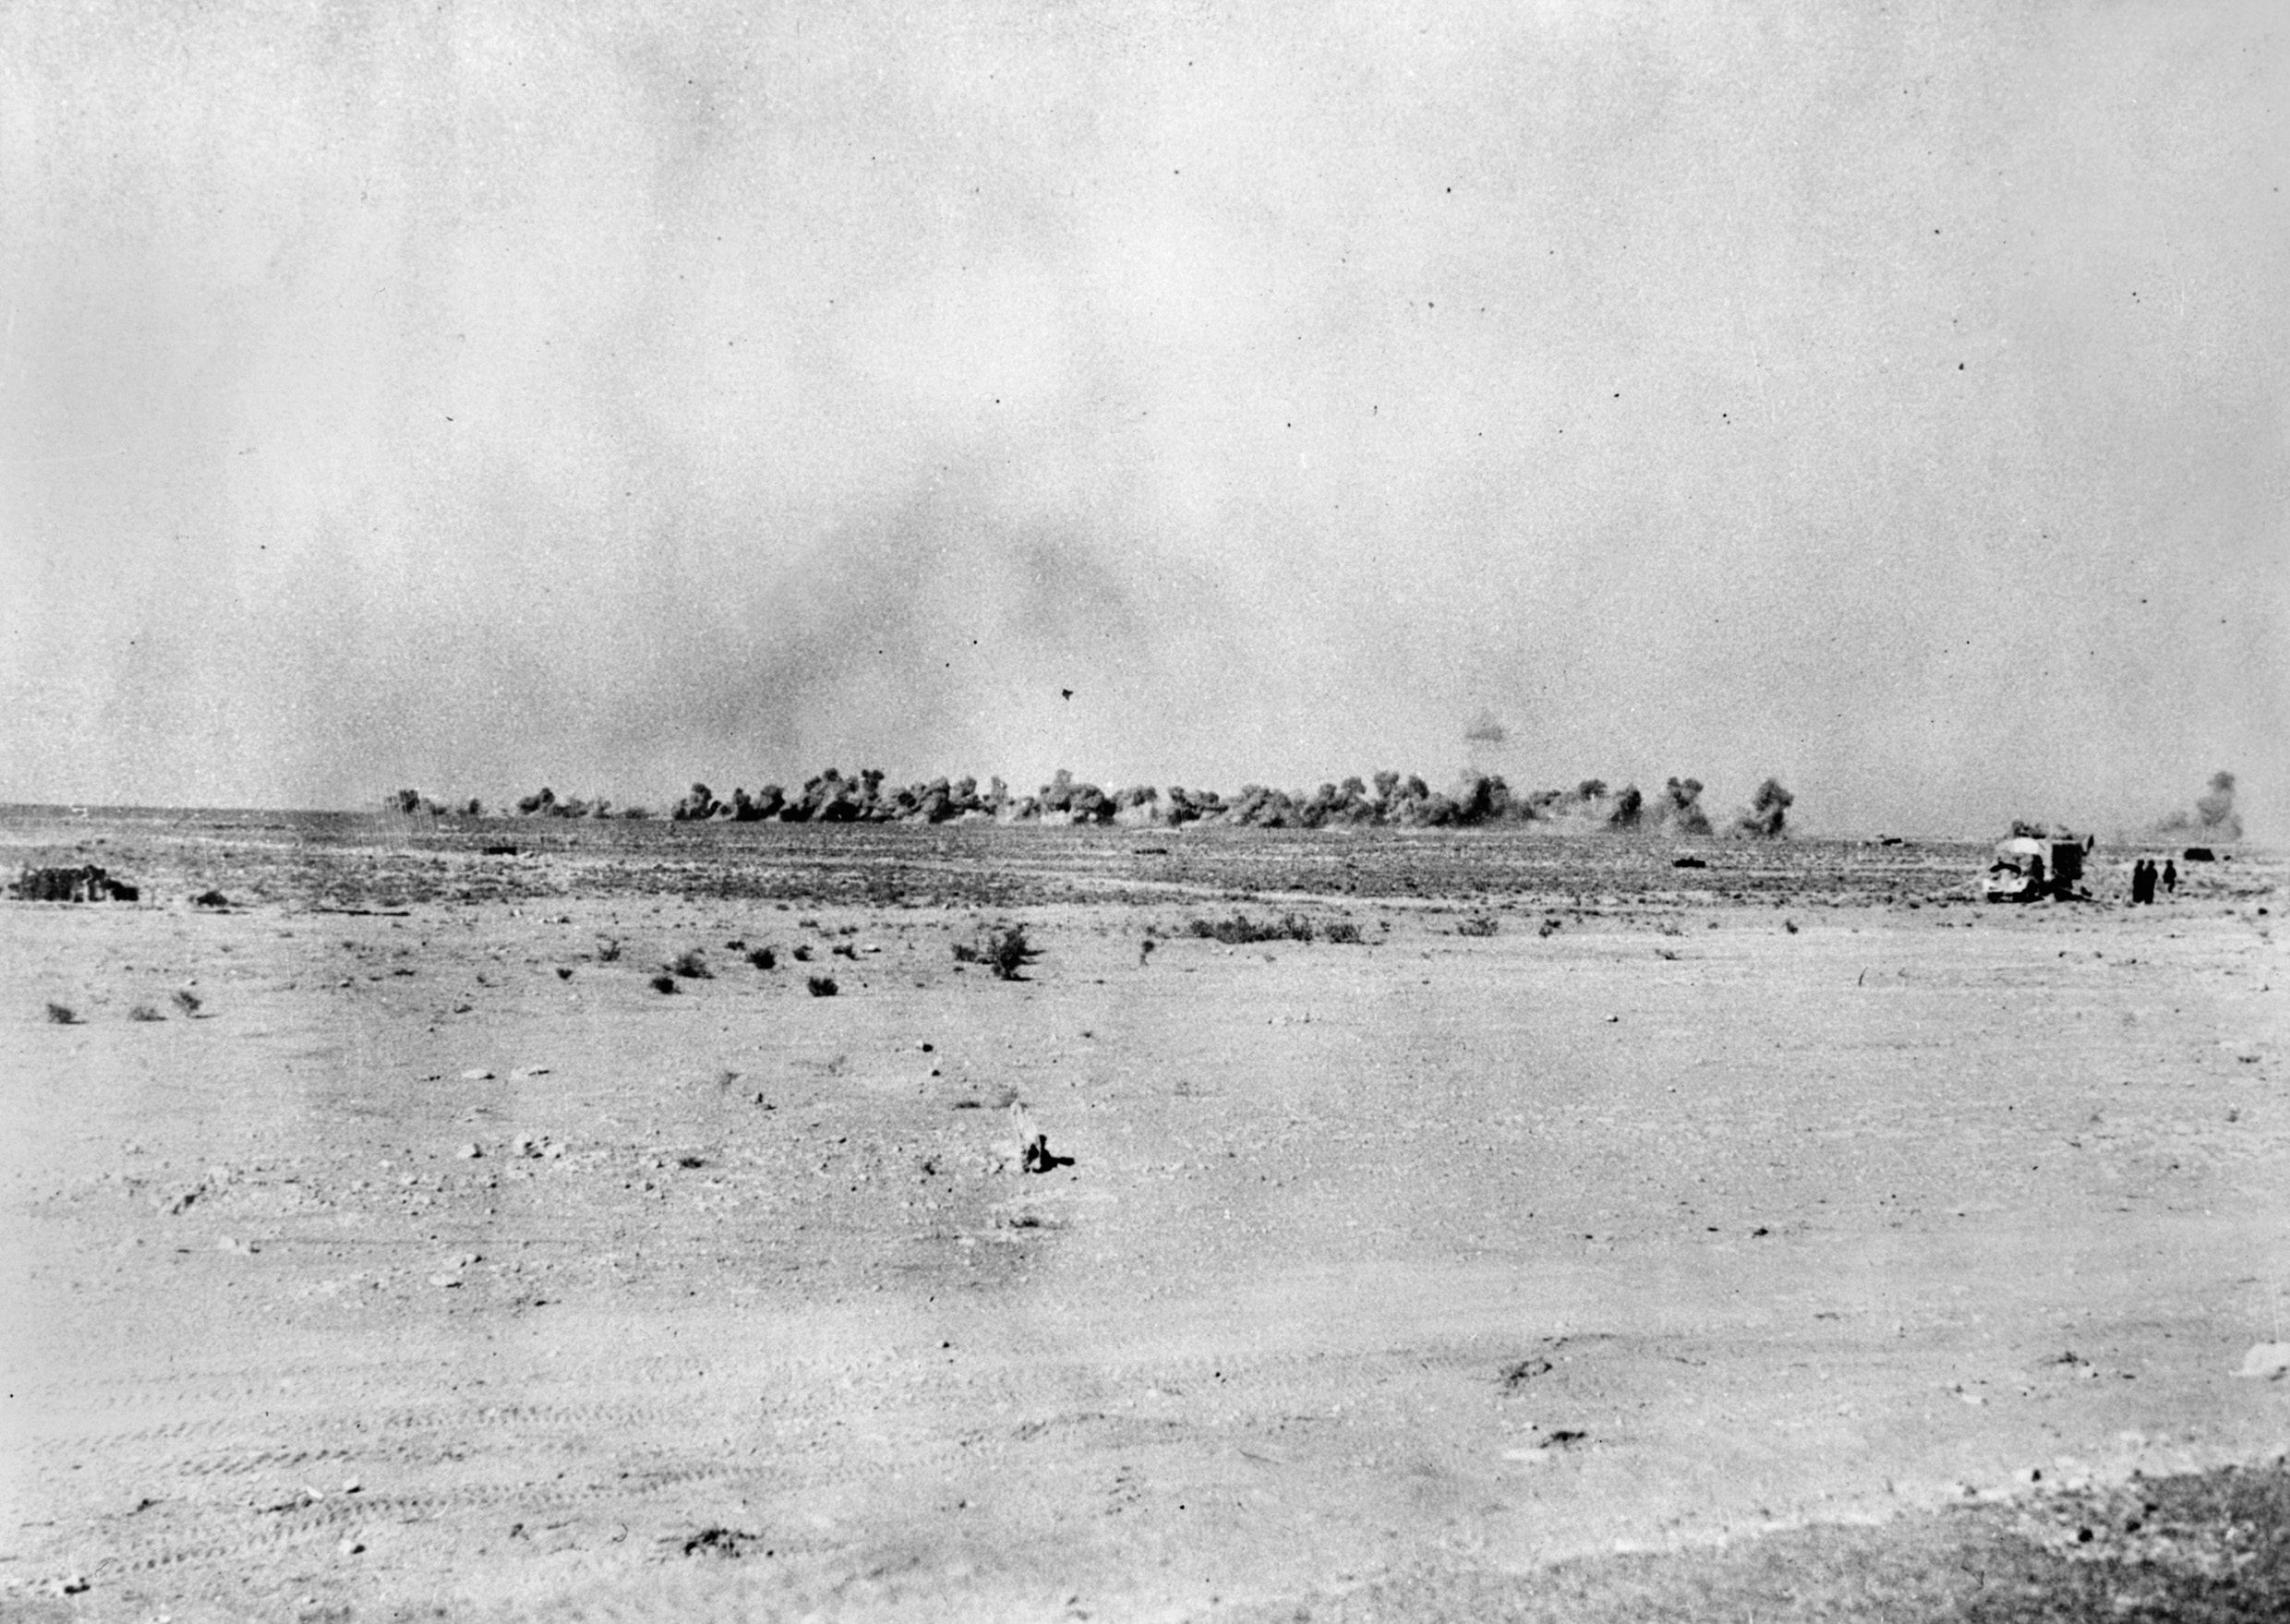 During the siege of the Italian defensive positions at Bardia on December 31, 1940, British artillery steadily bombards the Italians. Artillery fire played a key role in supporting infantry operations during Operation Compass.